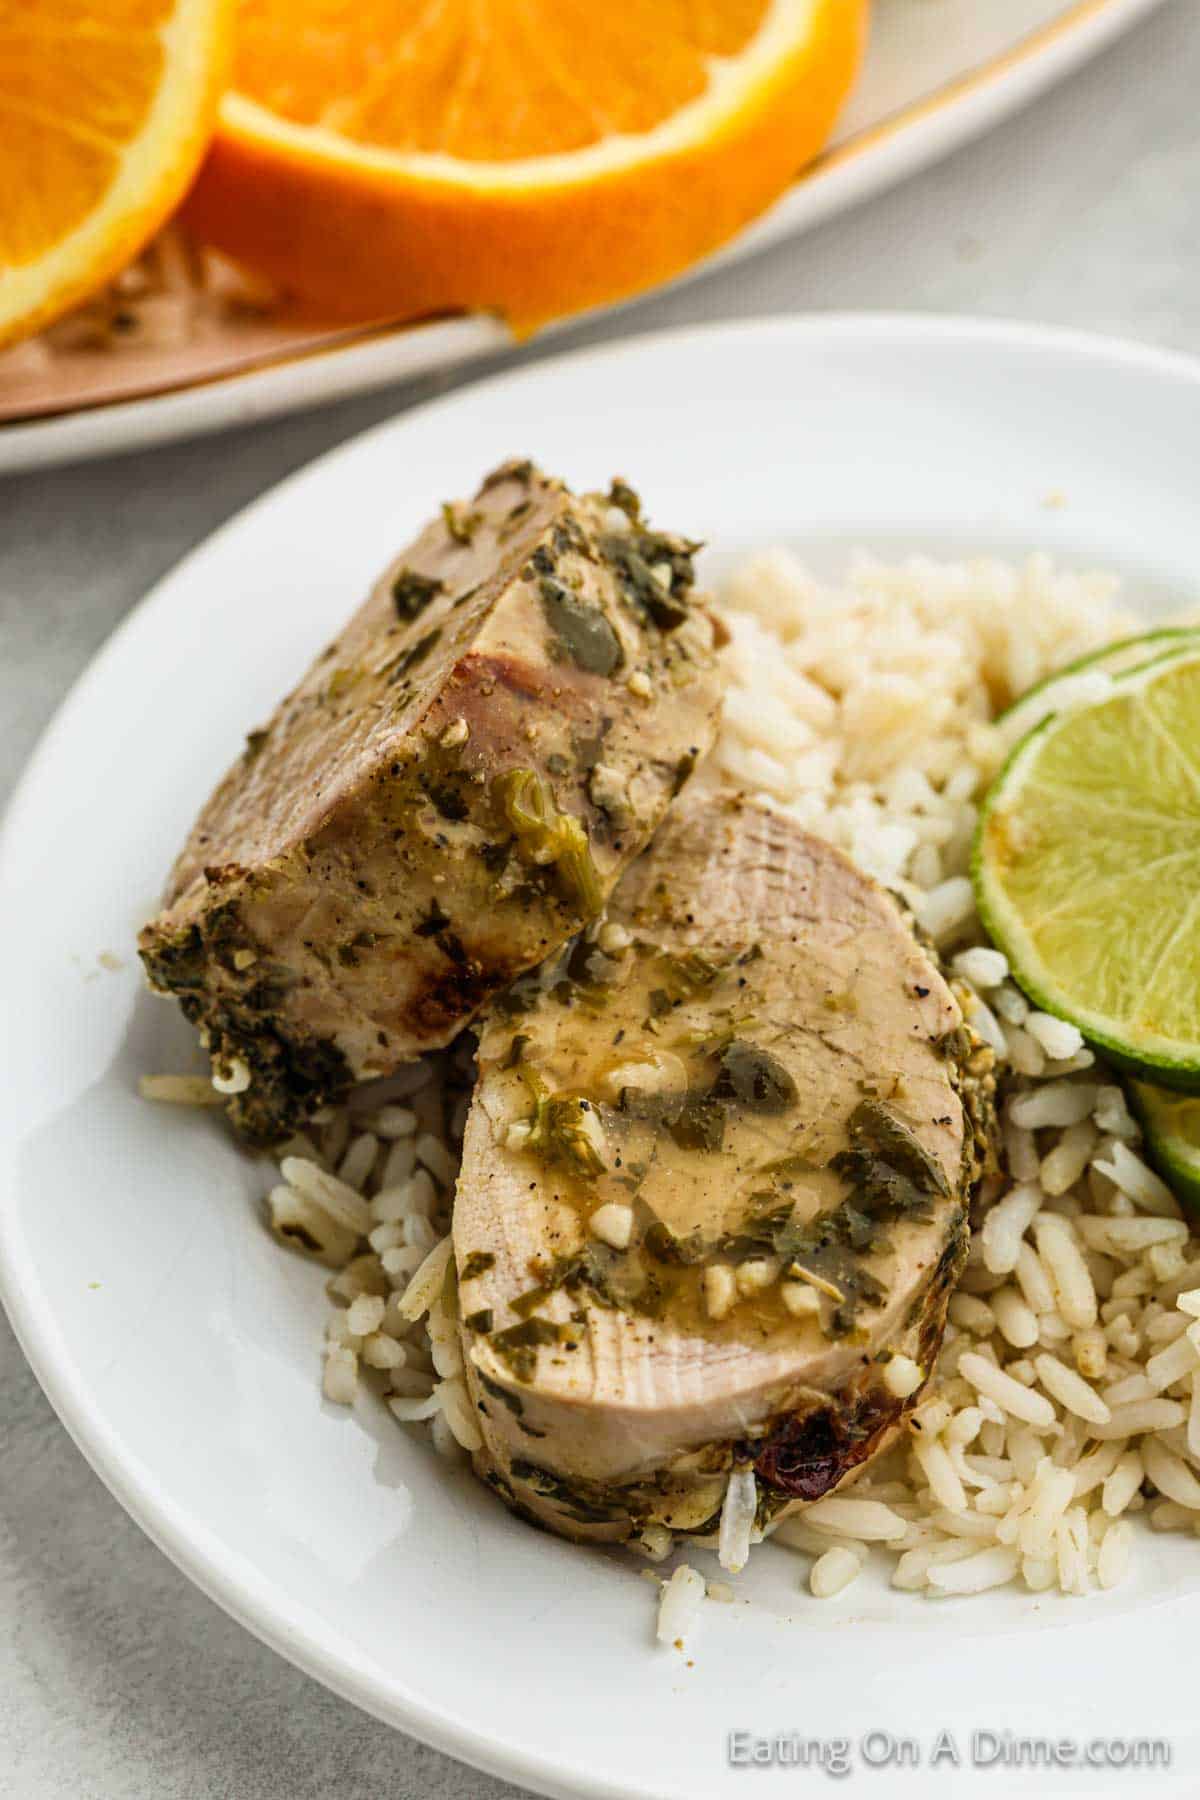 Two slices of seasoned pork tenderloin, inspired by a Crock Pot Cuban Mojo Pork Tenderloin recipe, are served on a bed of rice and garnished with lime slices on a white plate. In the background, orange slices rest on a separate dish. The pork features a green herb and seasoning coating.